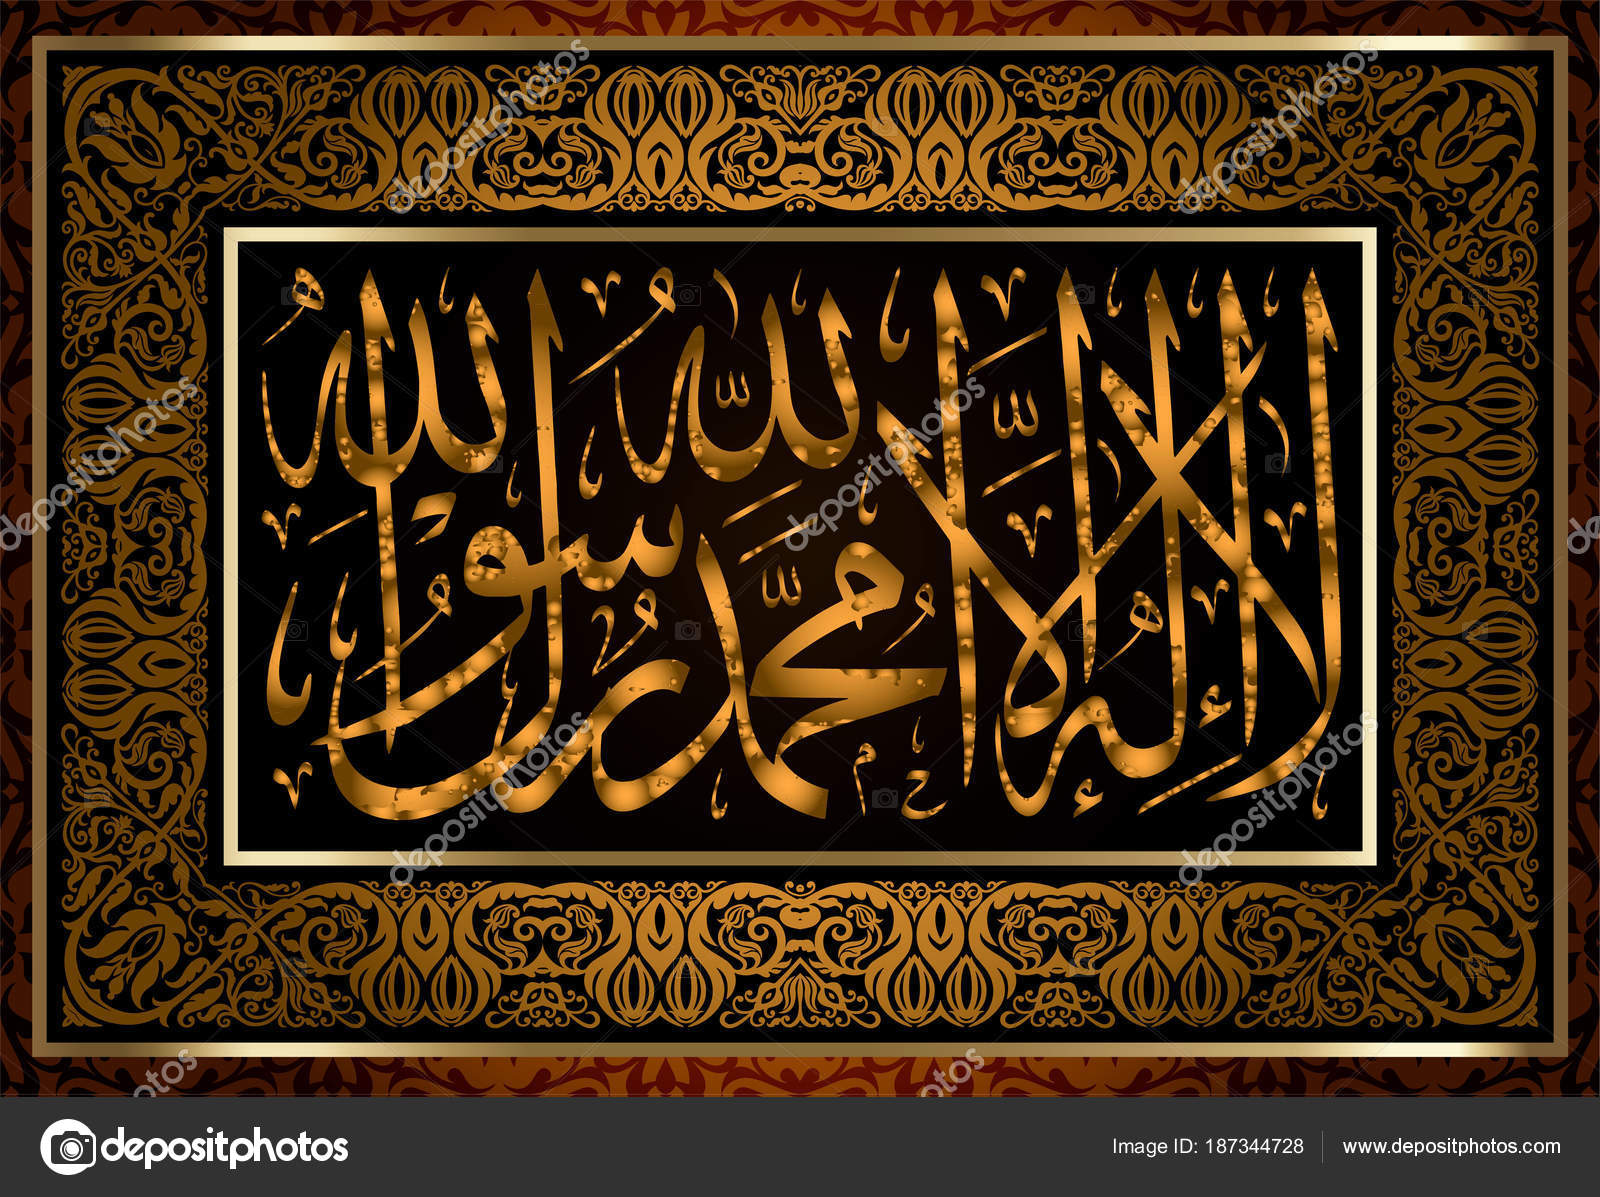 La Ilaha Illallah Muhammadur Rasulullah For The Design Of Islamic Holidays I Testify That There Is No God Worthy Of Worship Except Allah I Testify That Muhammad Is His Messenger Stock Vector Image By C